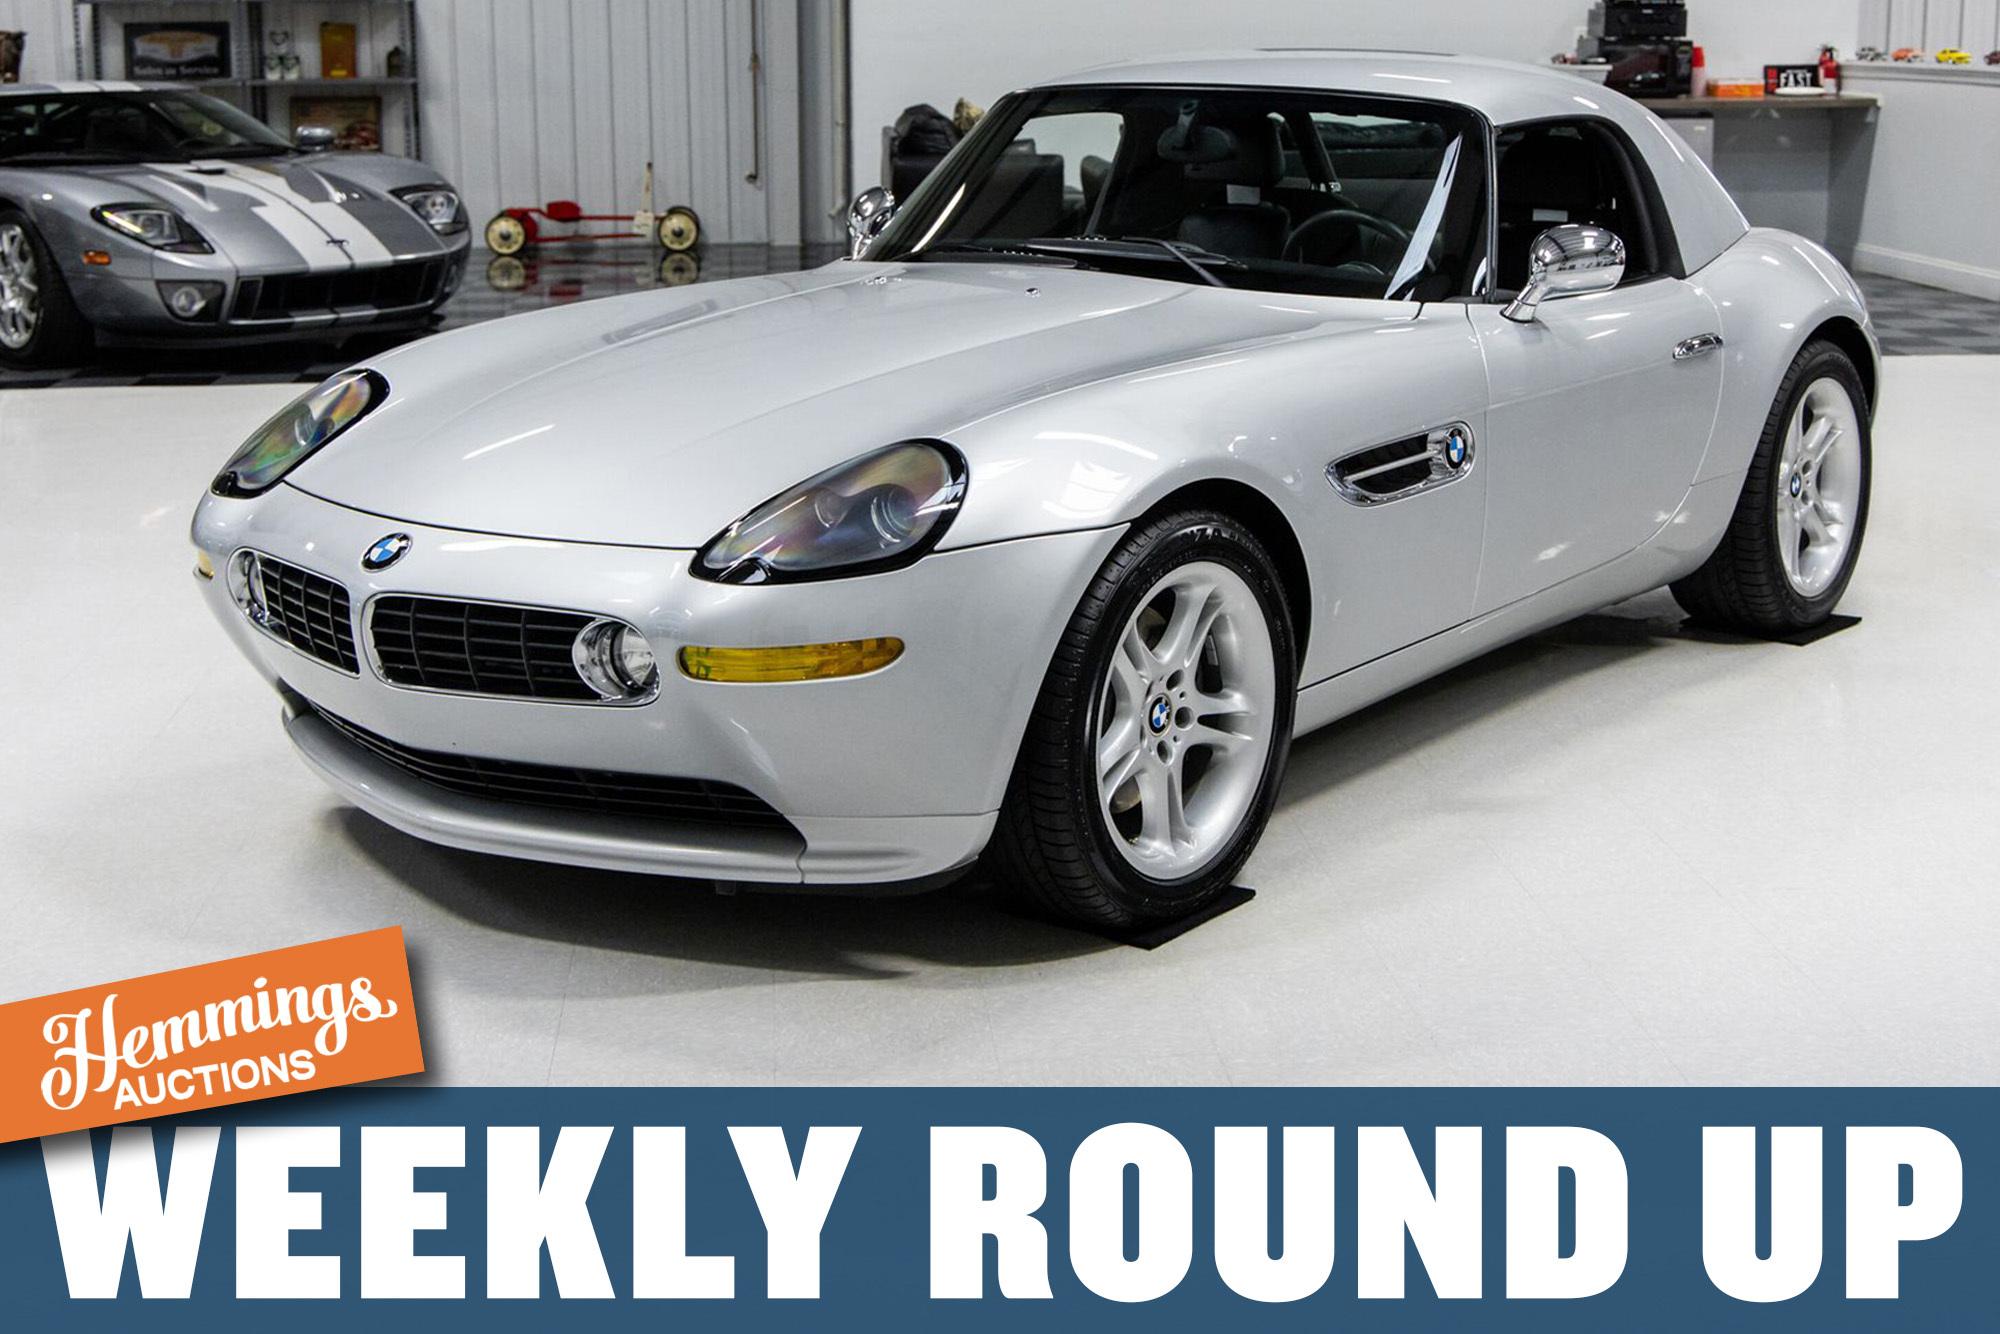 A big-dollar BMW Z8, brass-trimmed Ford Model T, and restomod Chevrolet C10: Hemmings Auctions Weekly Round Up for October 2-8, 2022